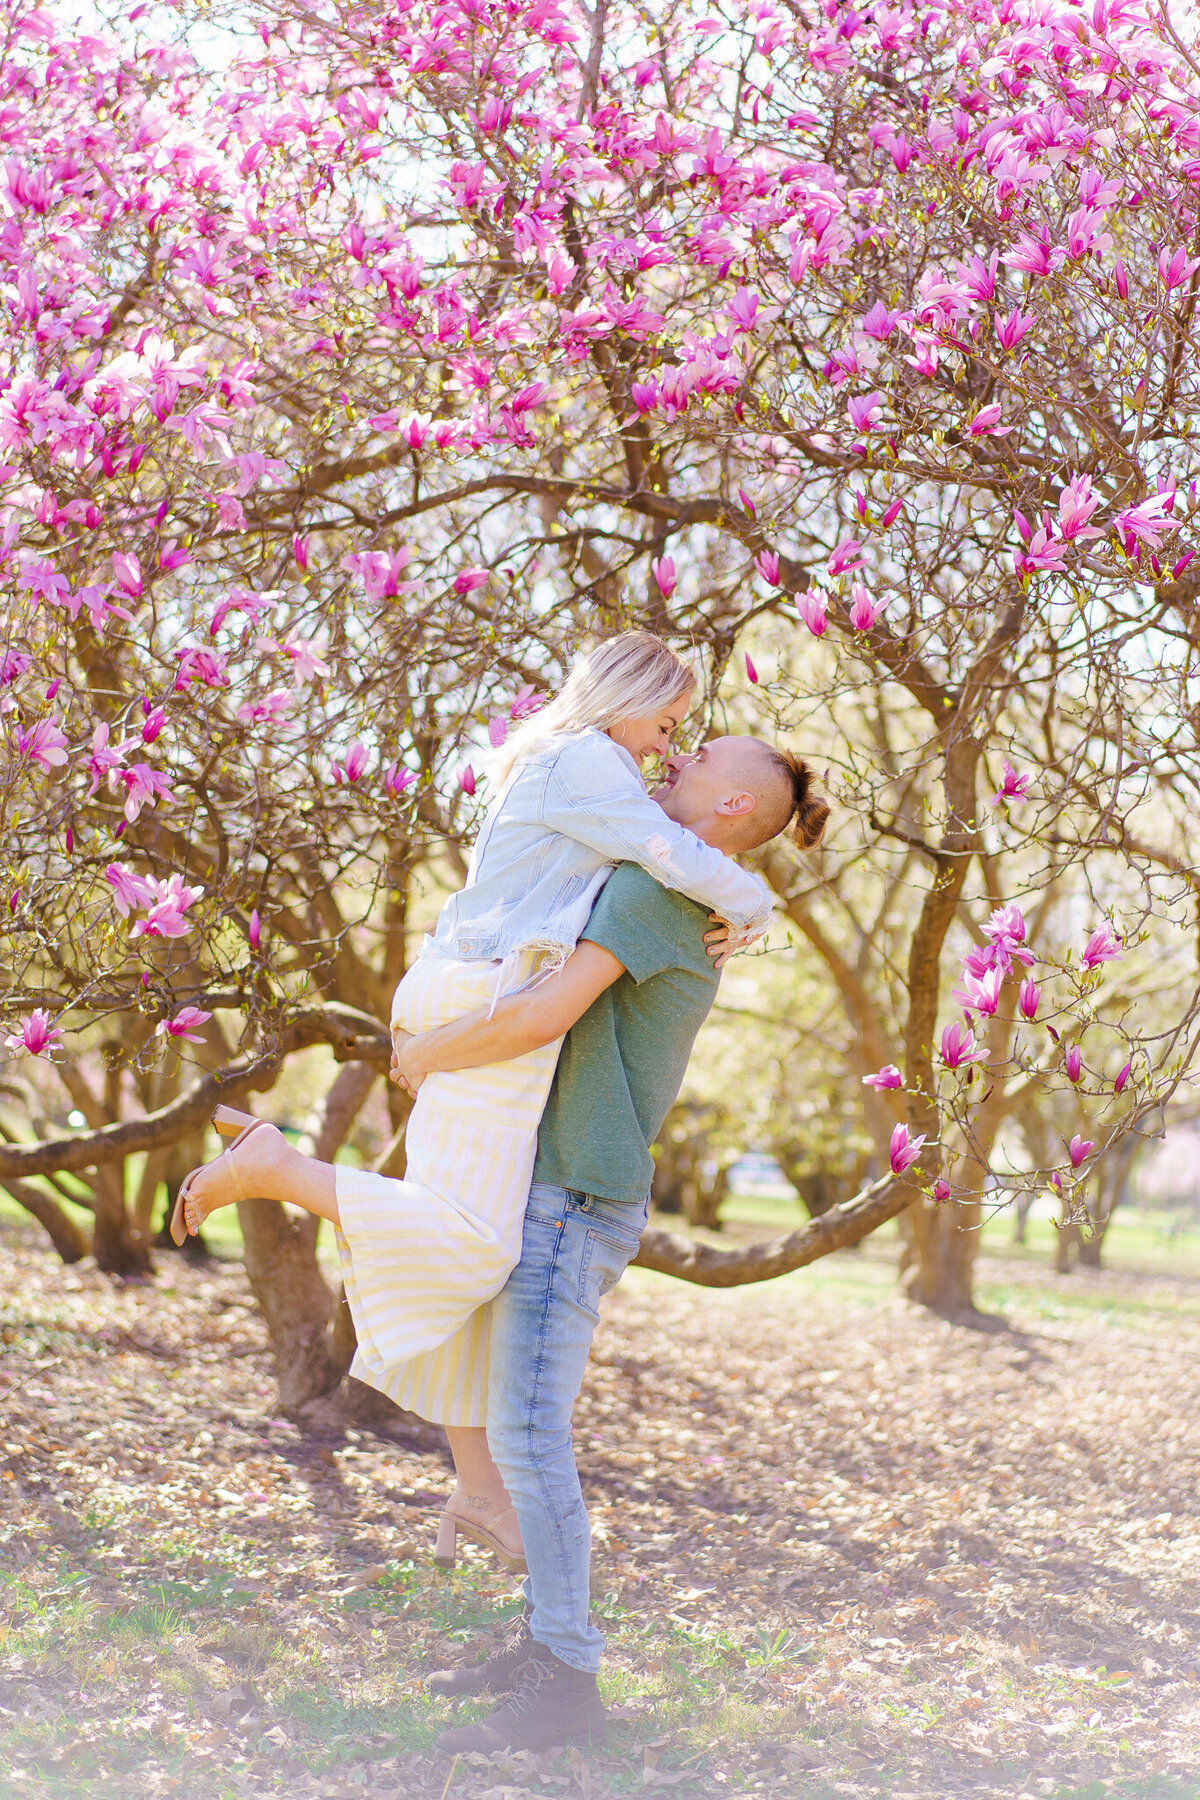 Man picks up his partner as she lifts one leg in front of pink magnolia trees - Goodale Park Columbus, Ohio.